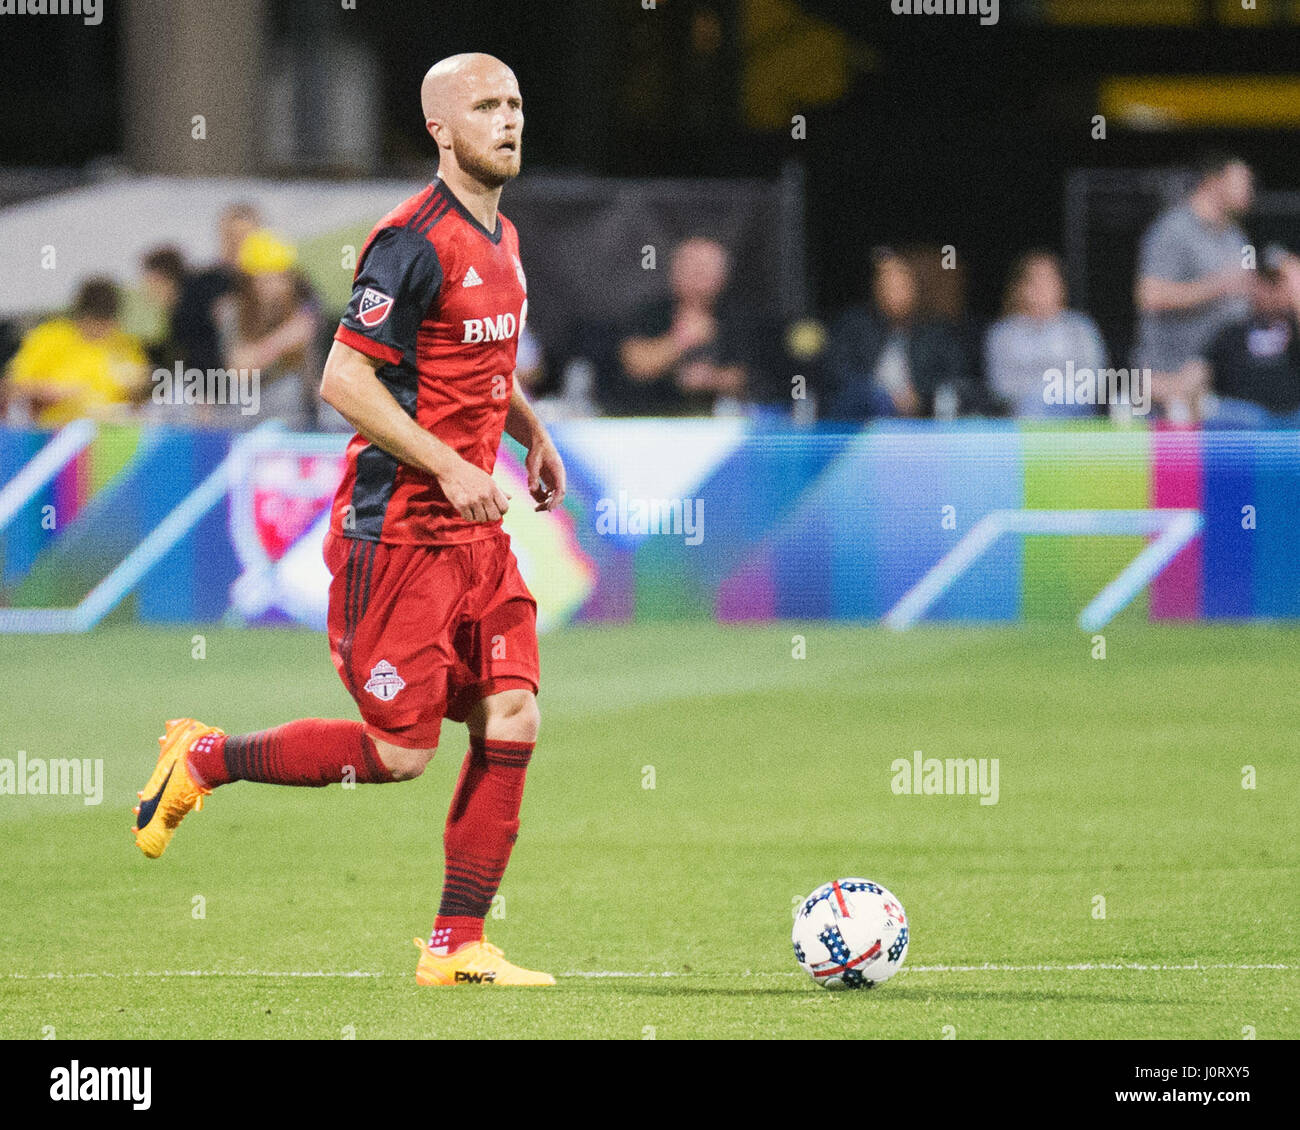 Columbus, Ohio, USA. 15th April, 2017. Toronto FC midfielder Michael Bradley (4) dribbles the ball down the pitch against Columbus in their game at Mapfe Stadium in Columbus, Ohio, USA. Brent Clark/Alamy Live News Stock Photo